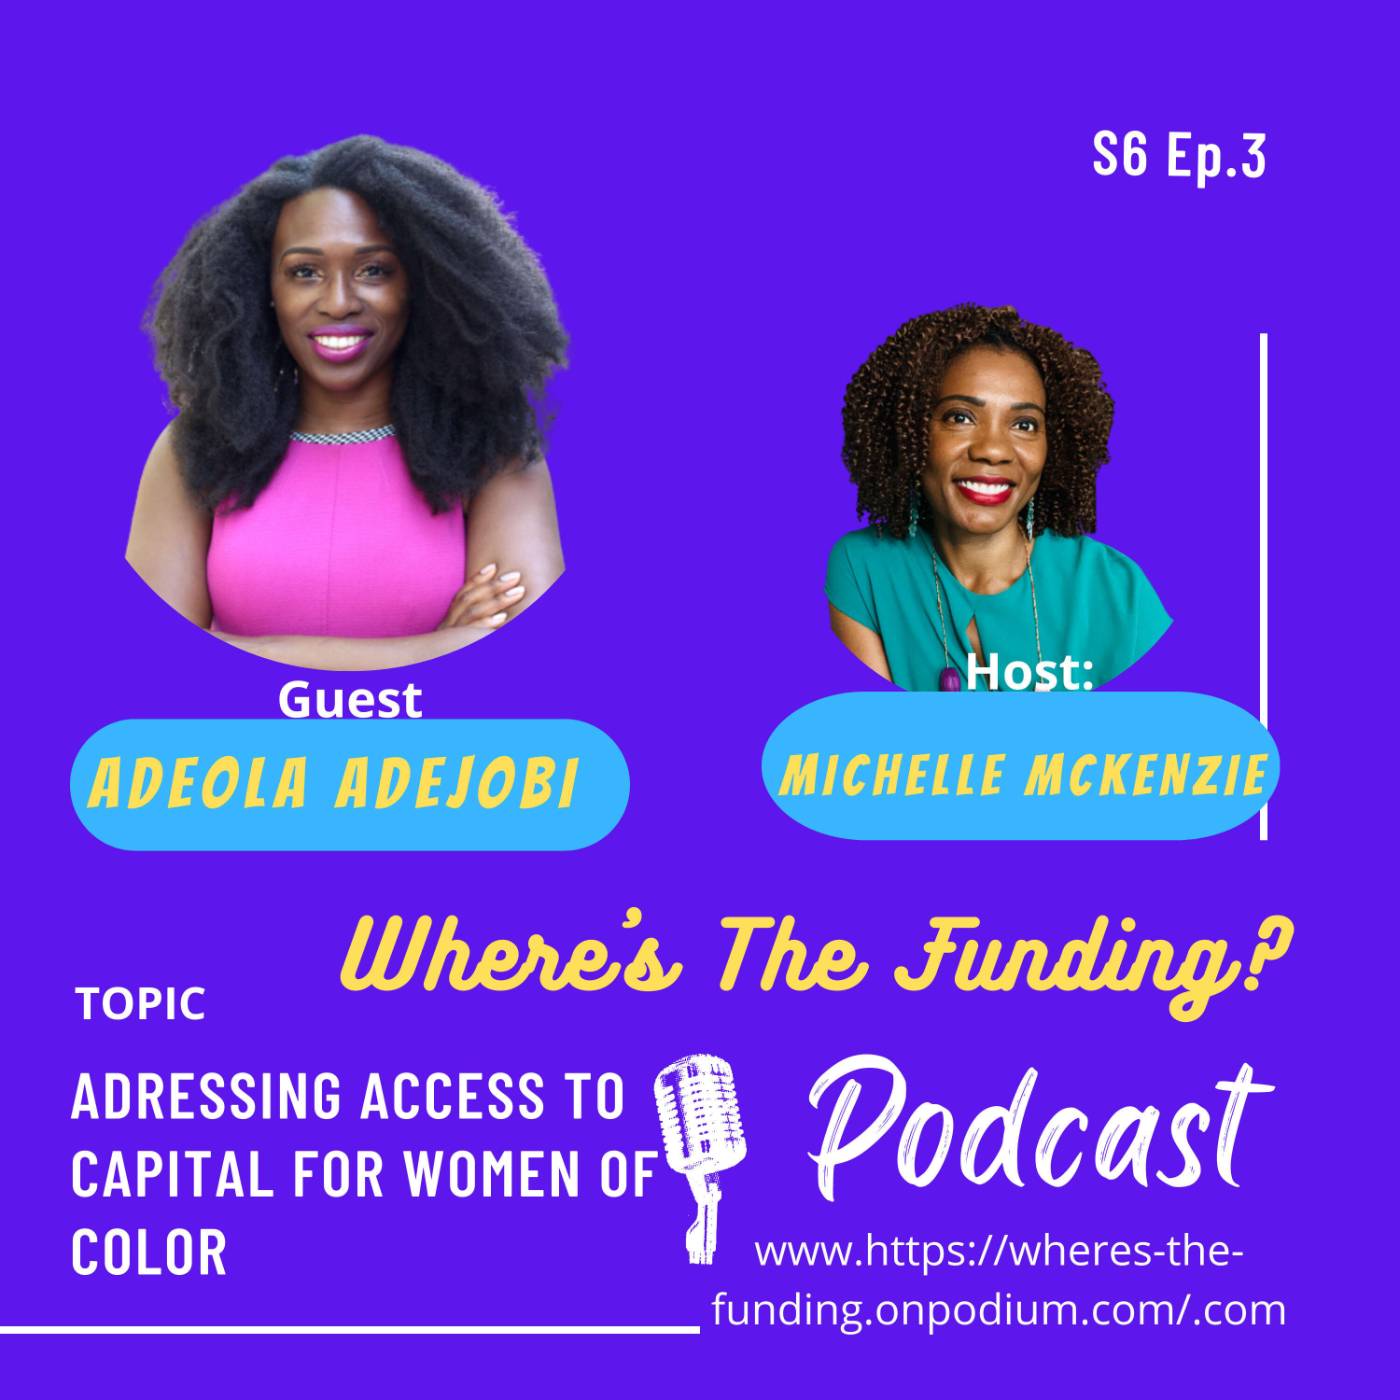 5 Things Women of Color Should Do to Improve Their Access to Capital with Adeola Adejobi S6 Ep. 3